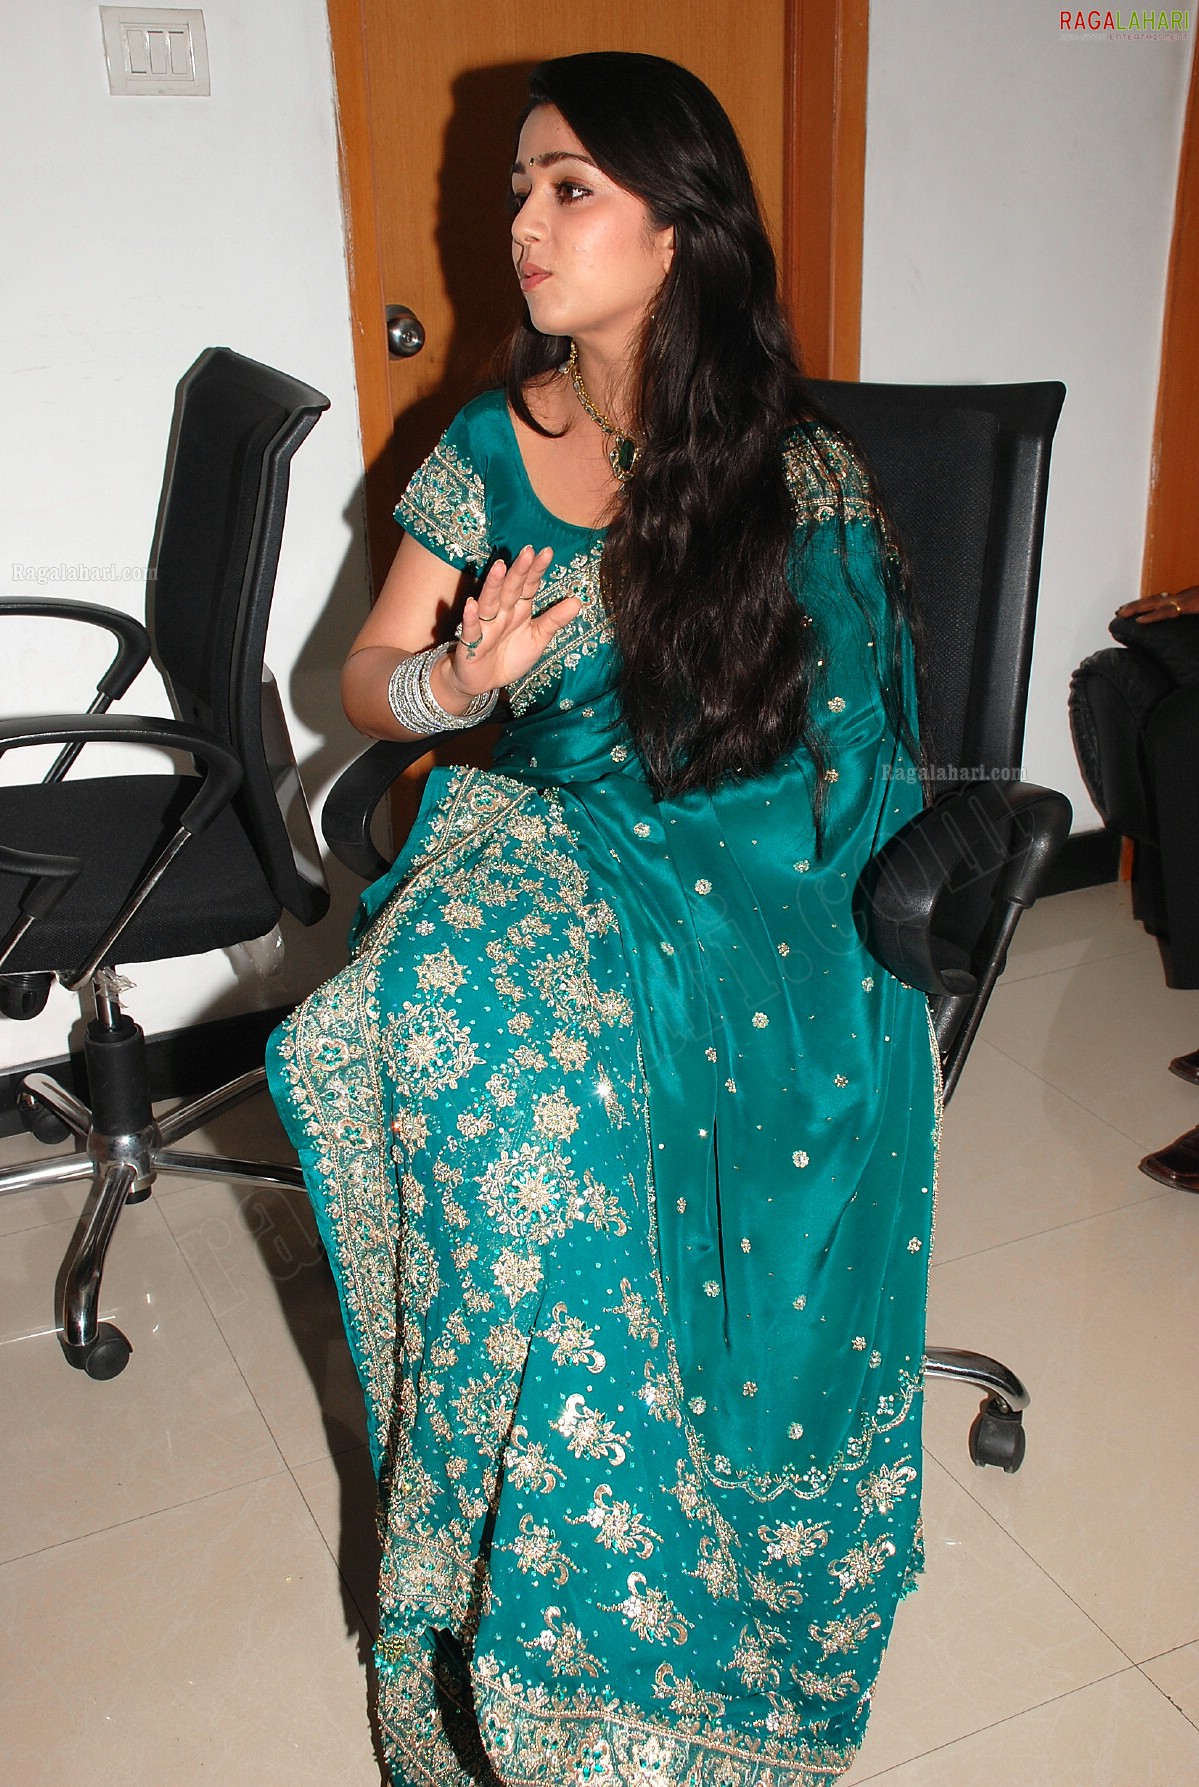 Charmi Kaur at TMC 2011 Dhanteras Special Draw HD Gallery, Images